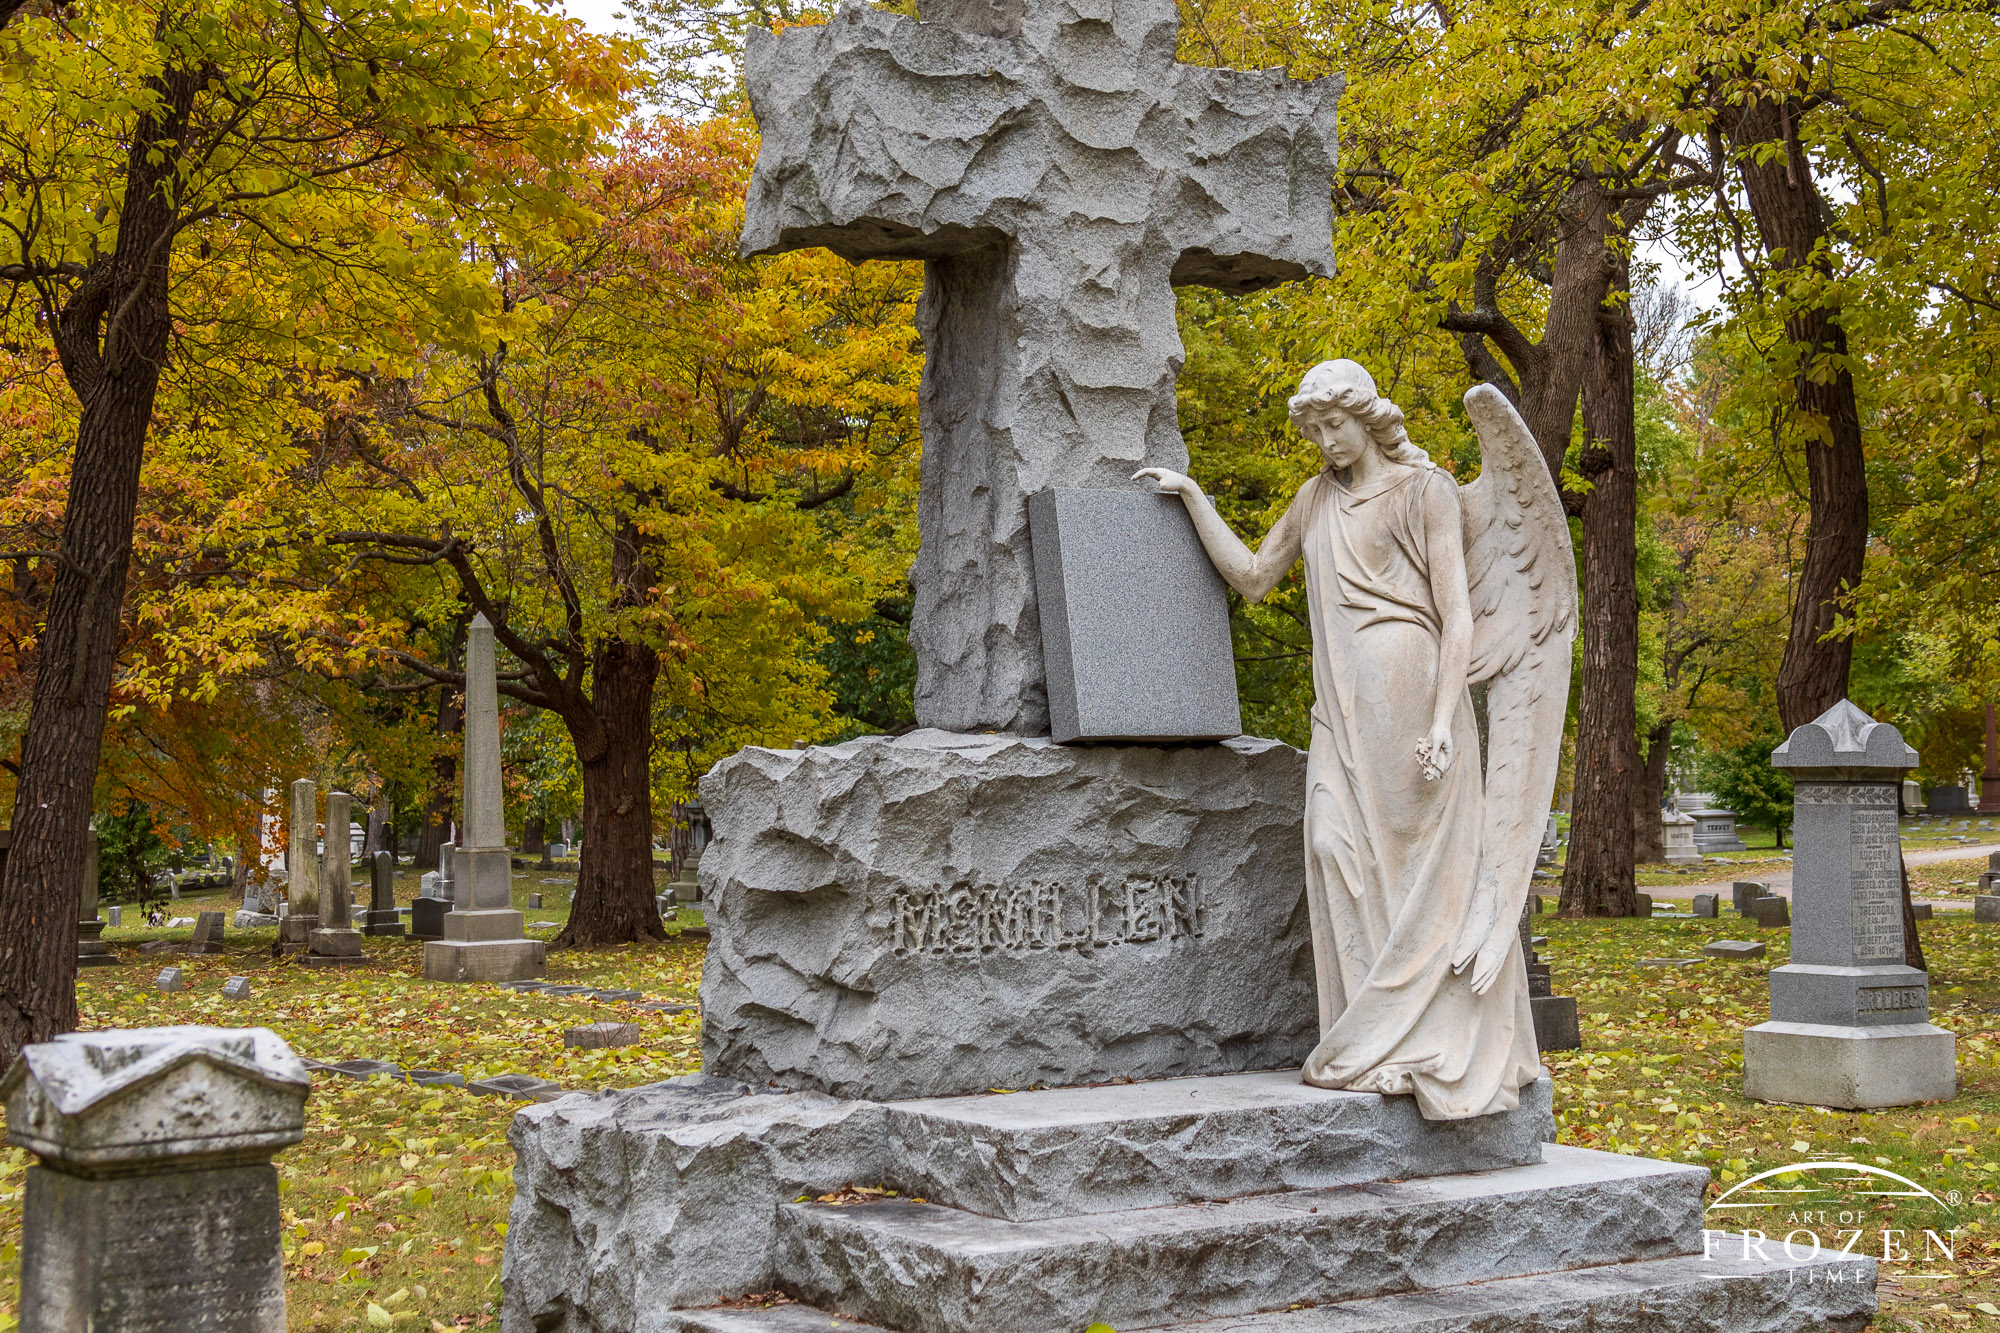 An autumn view of Woodland Cemetery’s McMillen Angel where the contemplative white marble angle appears to have just wiped the family slate clean